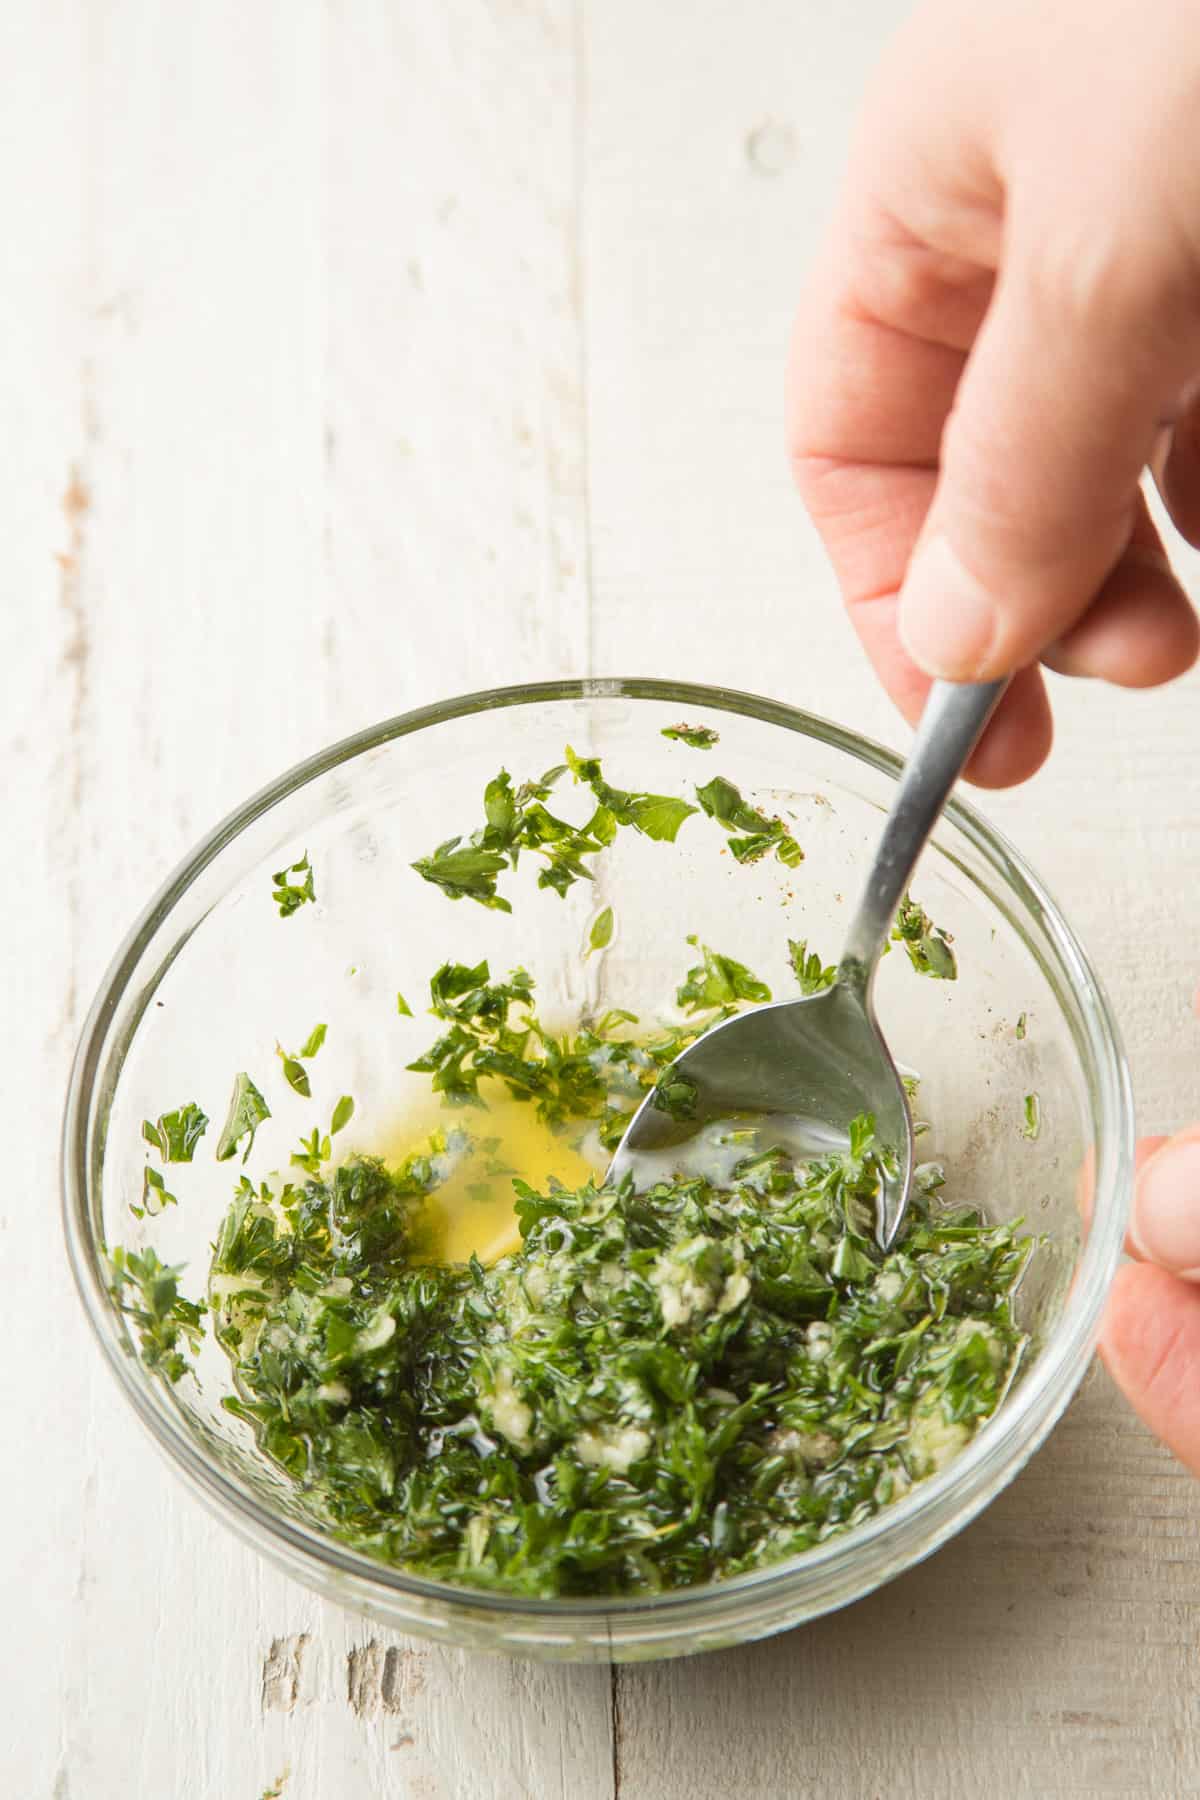 Hand stirring herbs and oil together in a bowl.